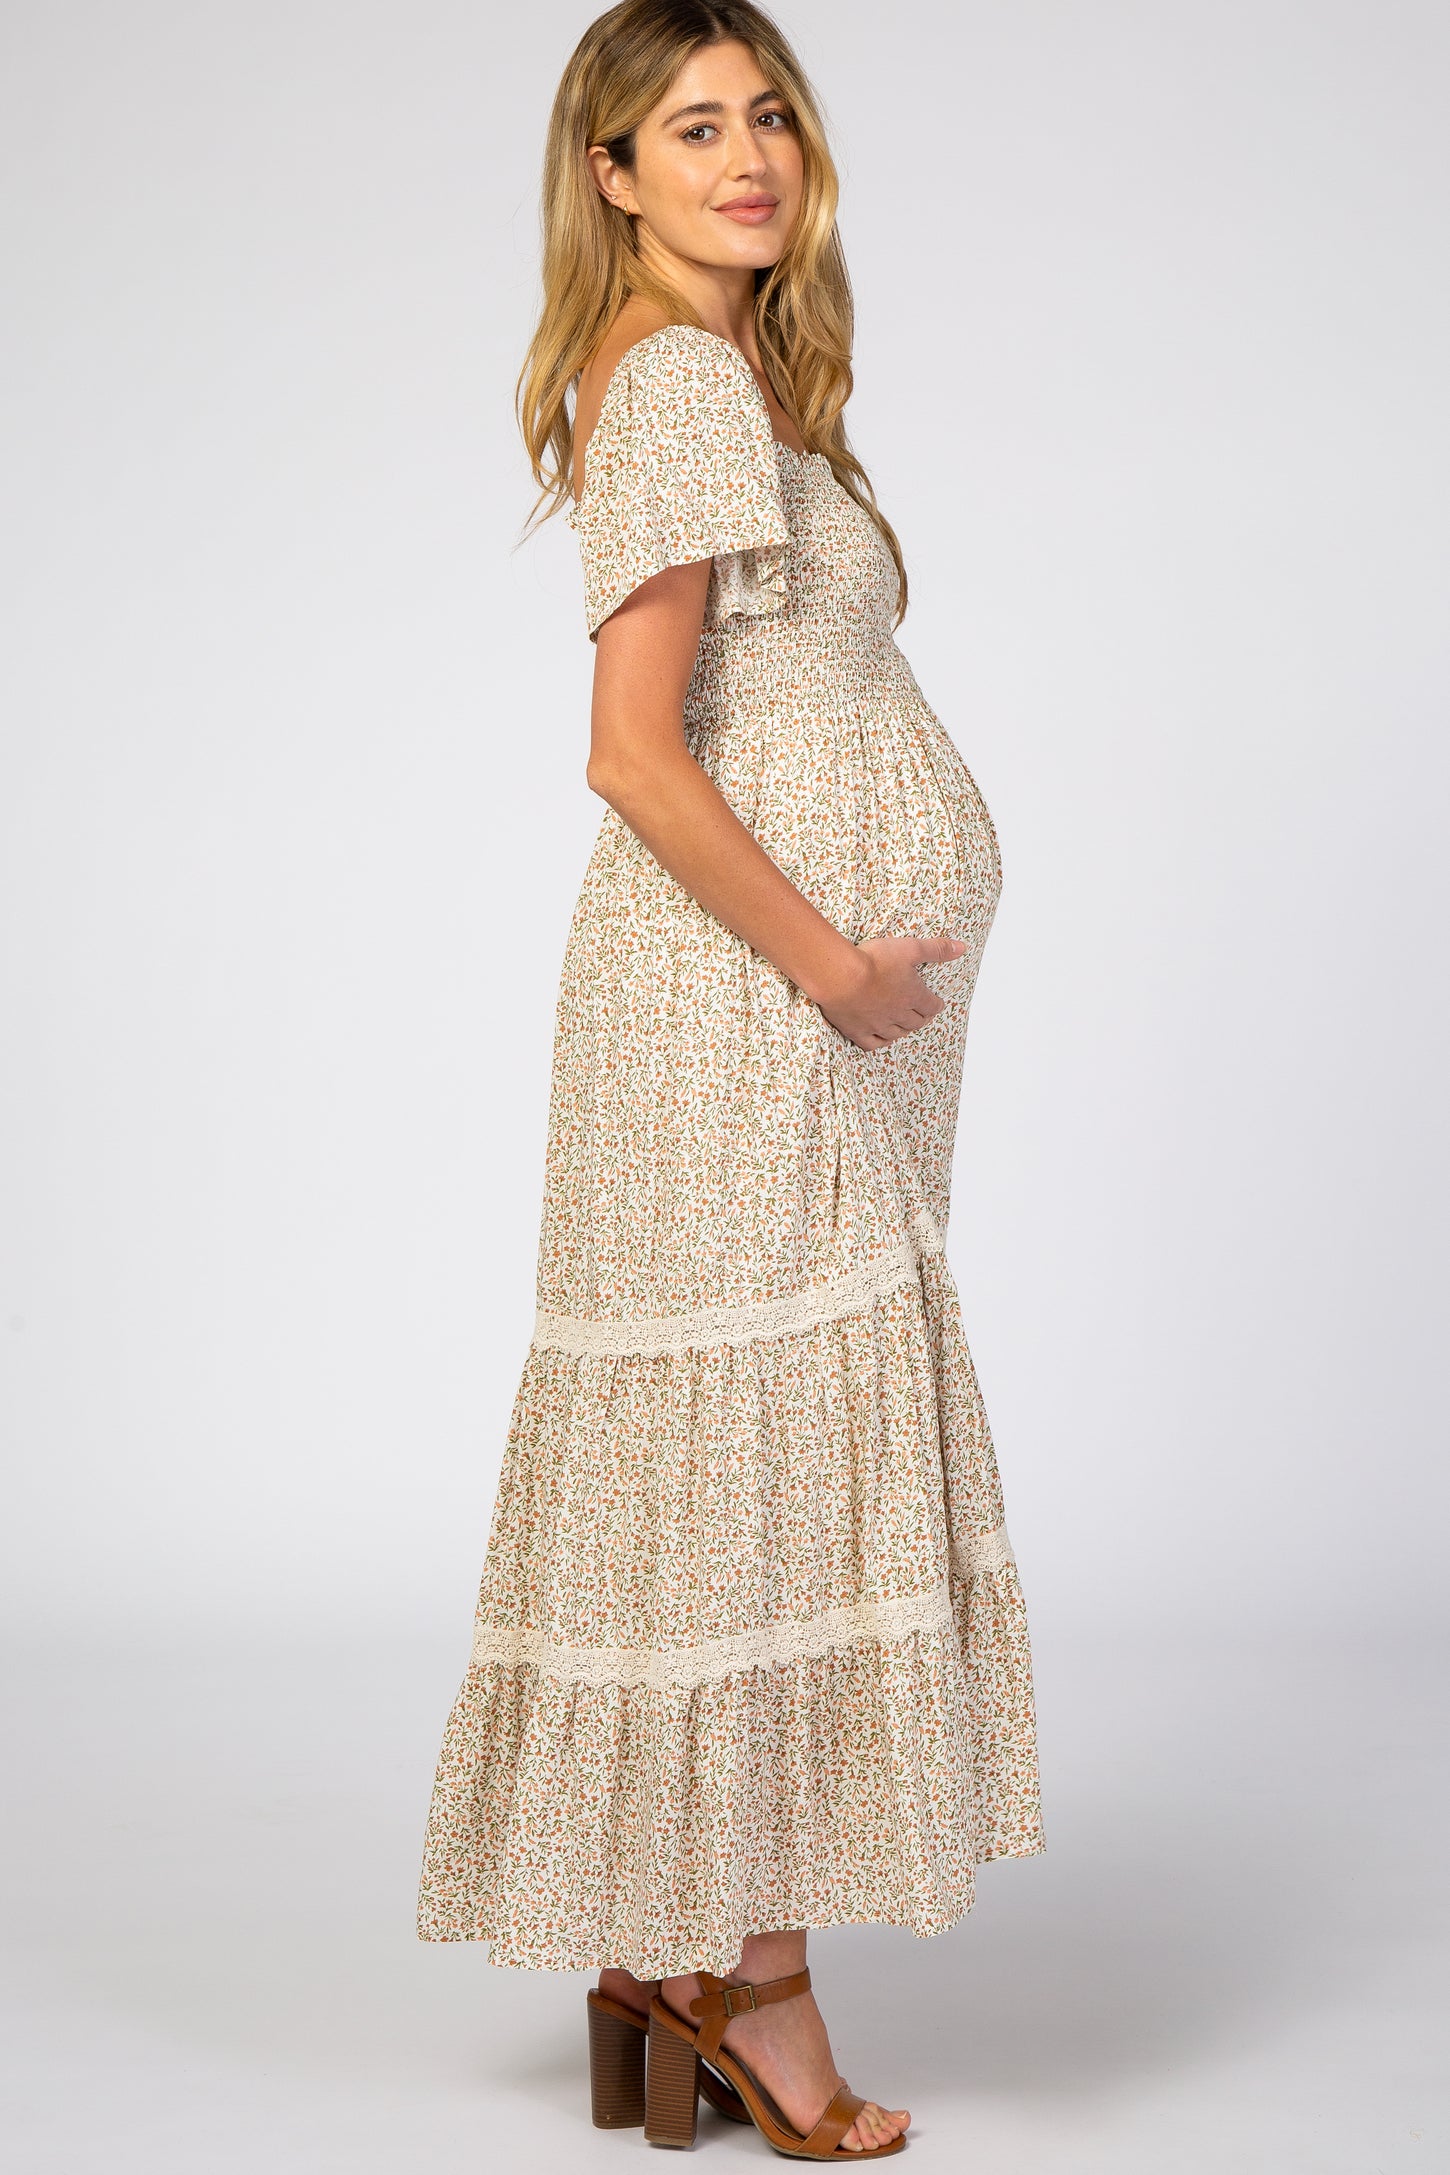 Ivory Floral Square Neck Smocked Front Lace Trim Maternity Maxi Dress